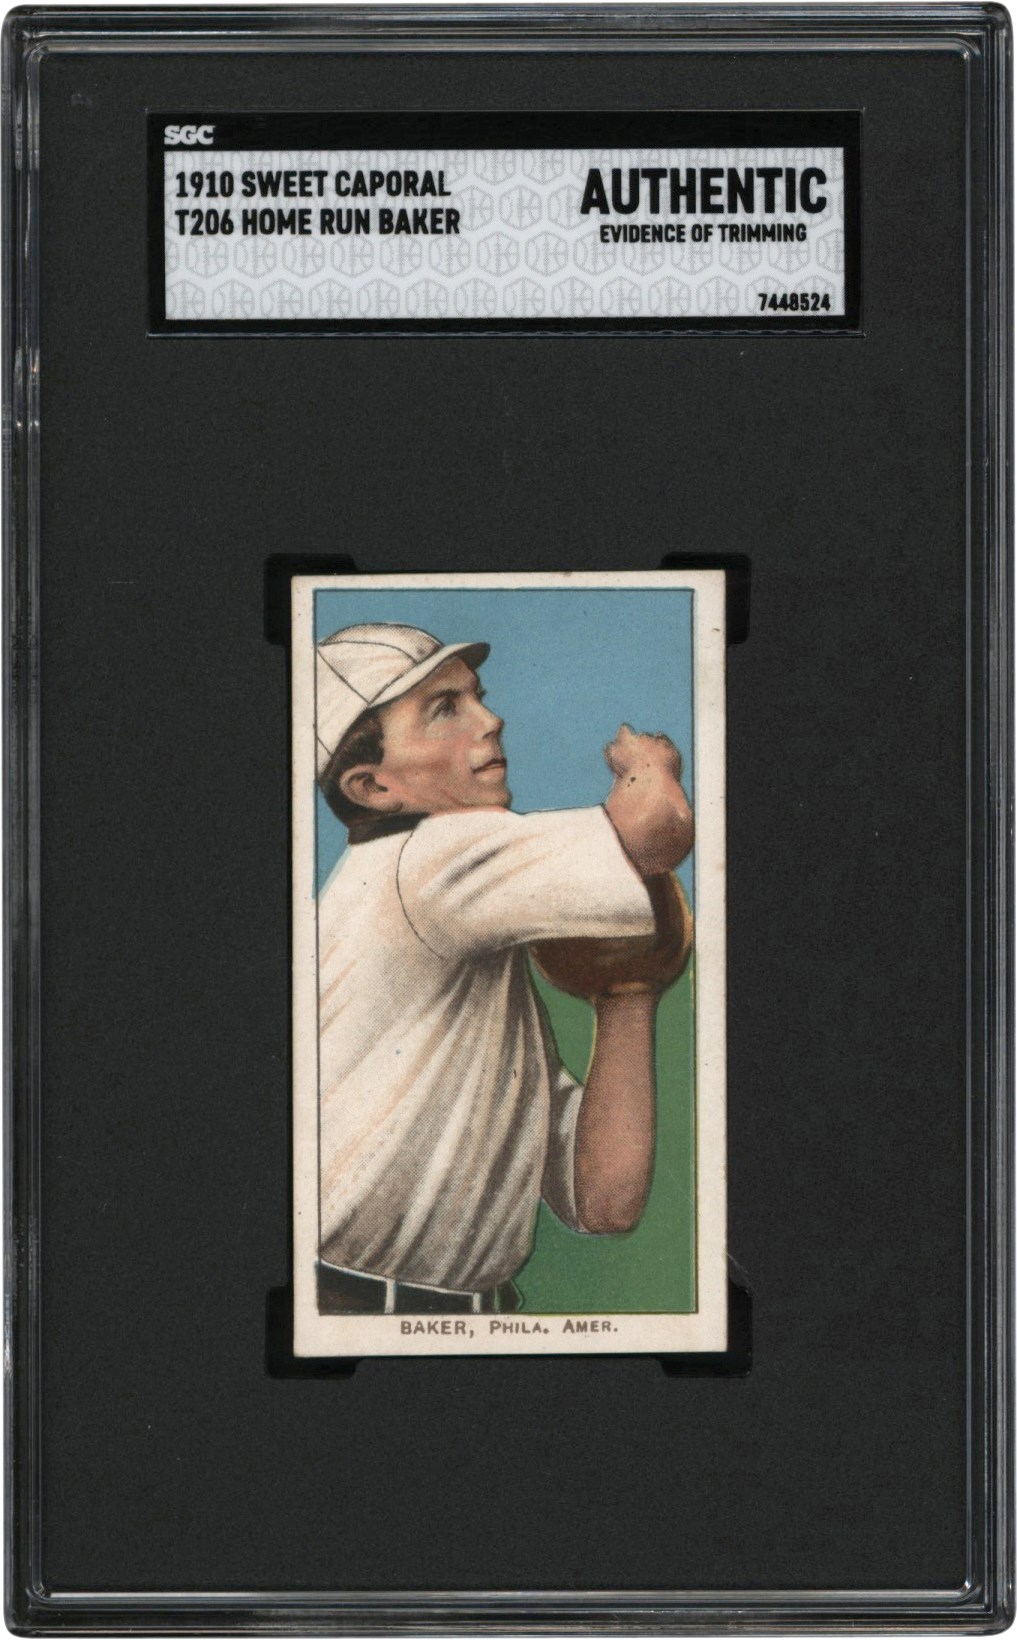 - 909-1911 T206 Home Run Baker Caporal 350 Back Card SGC Authentic